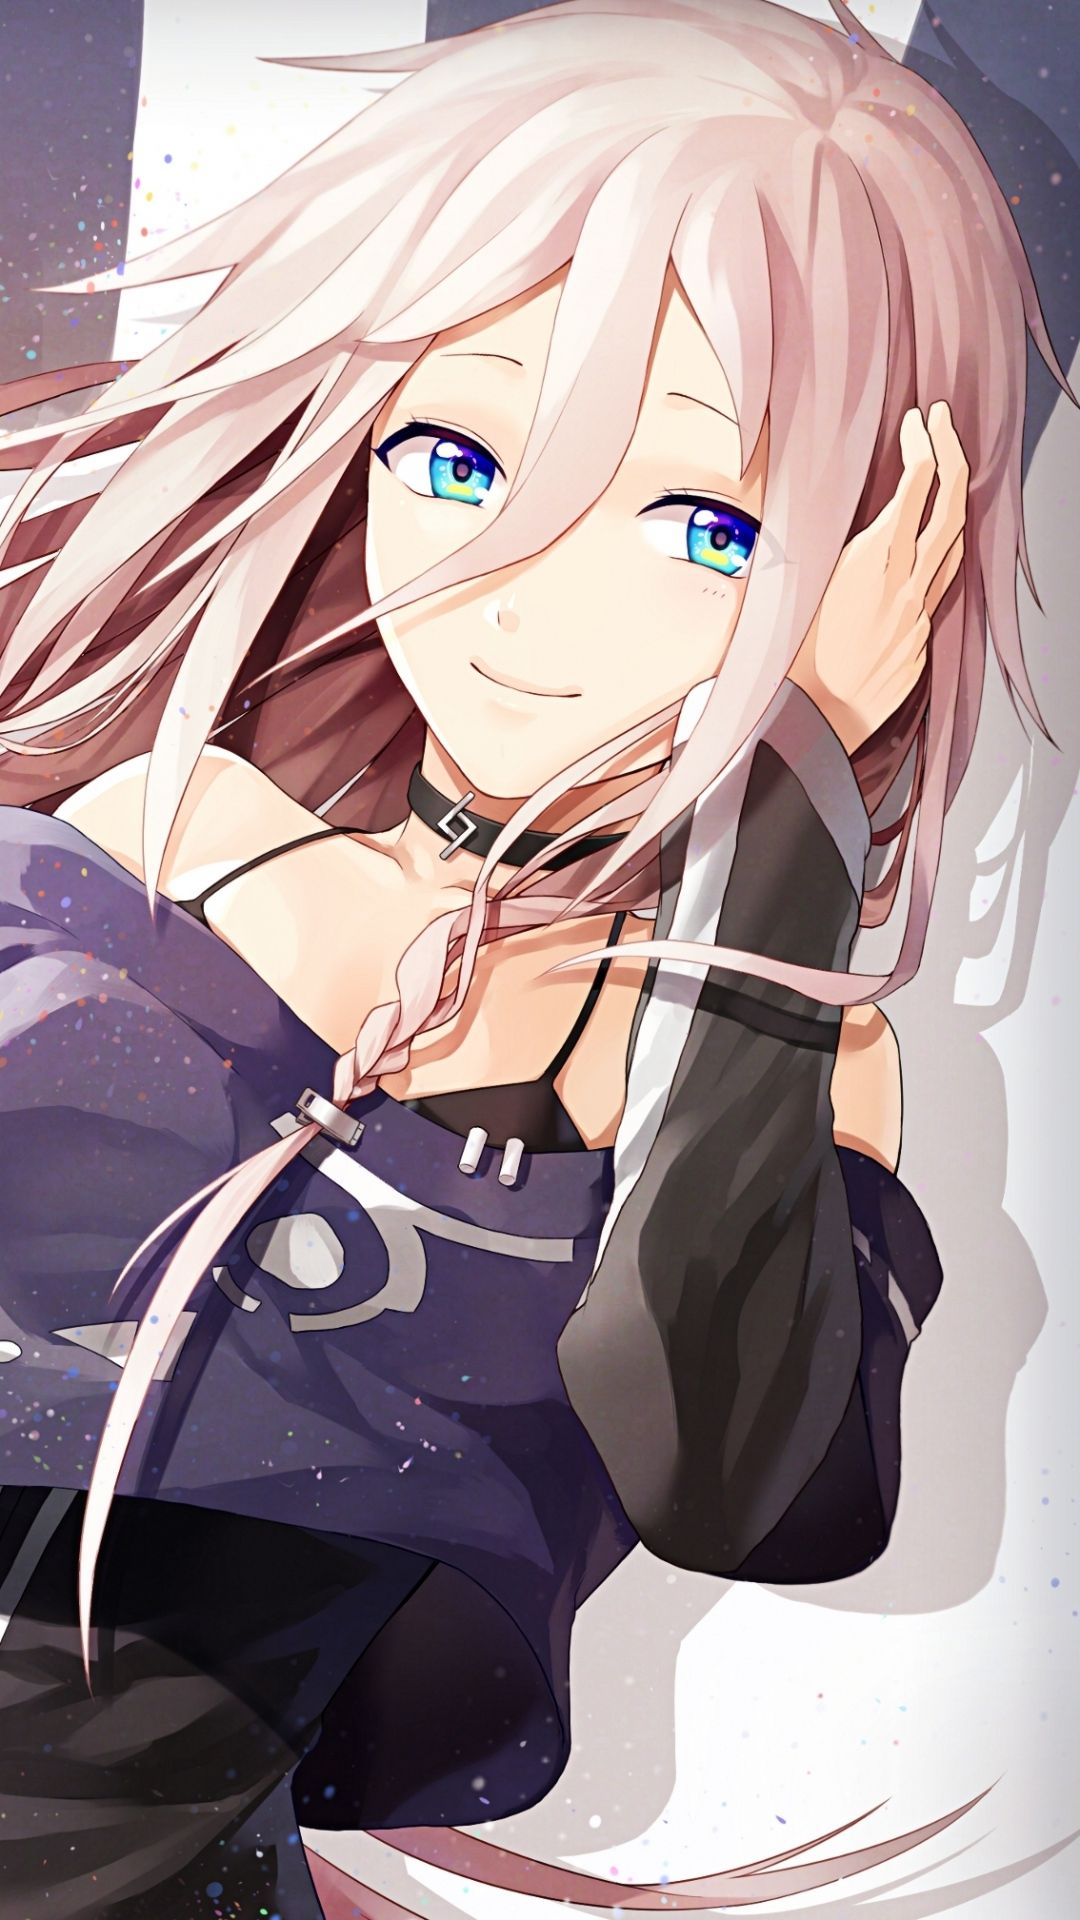 Vocaloid Ia Girl Style Jersey Emotion - Anime Girl Wallpaper Iphone 6 - HD Wallpaper 